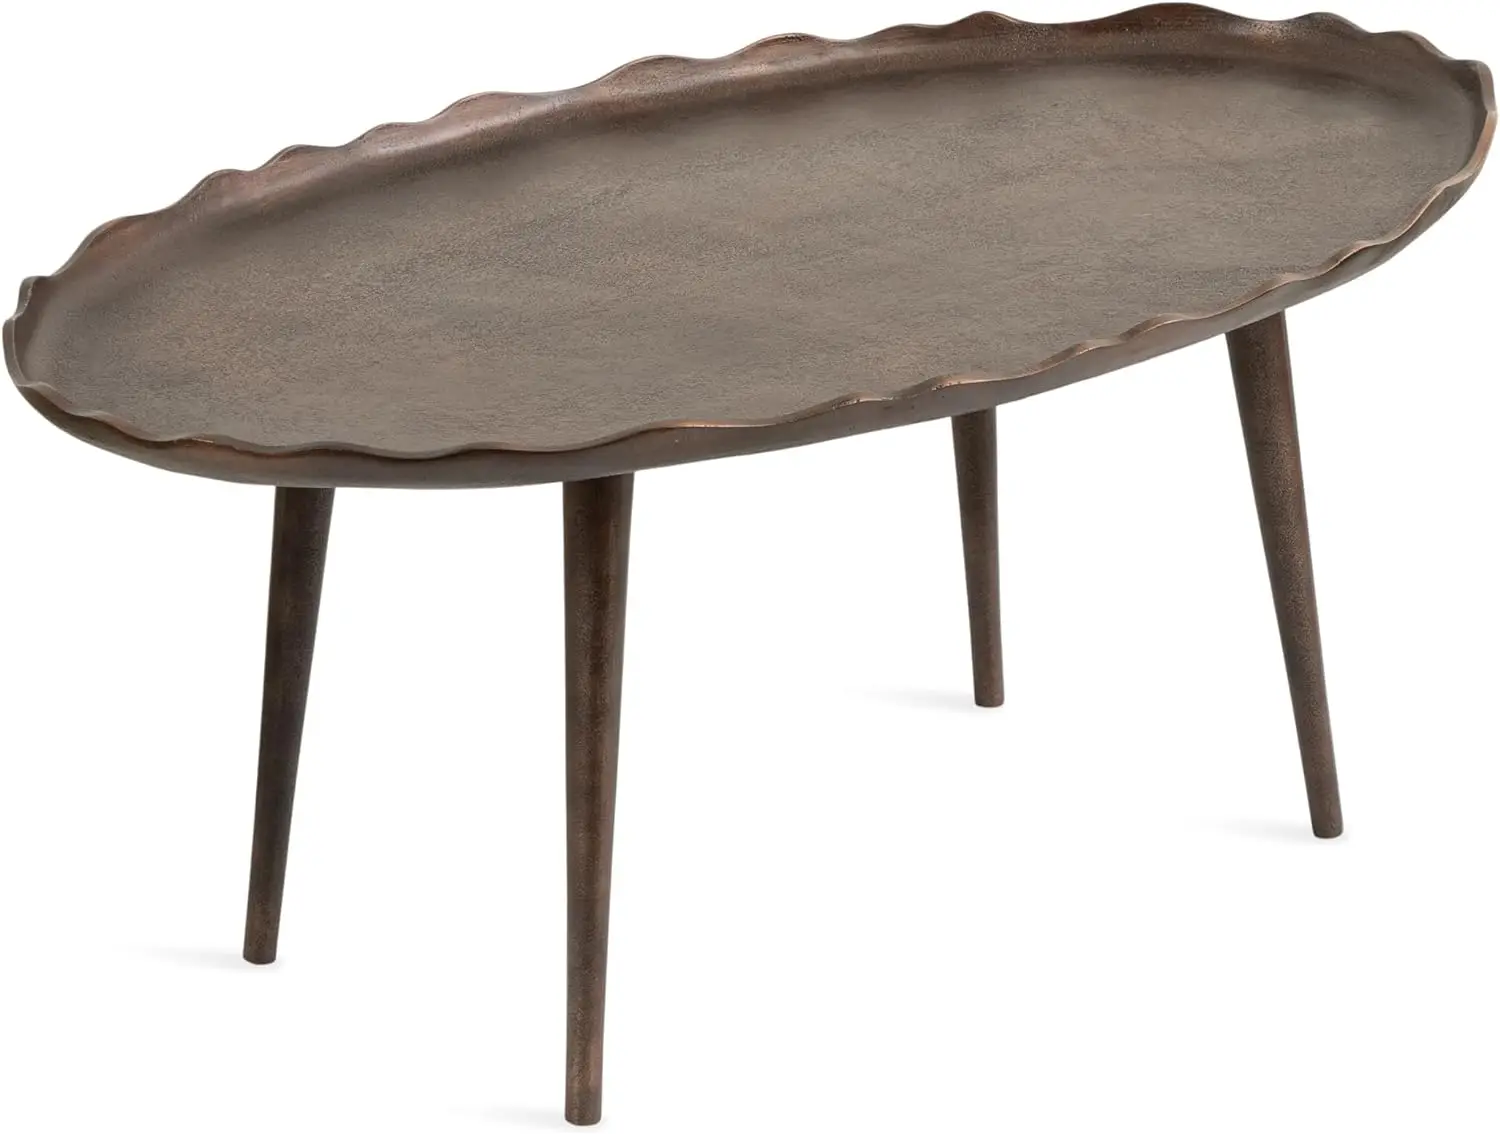 

Oval Coffee Table with Unique Deckled Edge for Living Room Home Decor Center Table, 34x20x15, Bronze